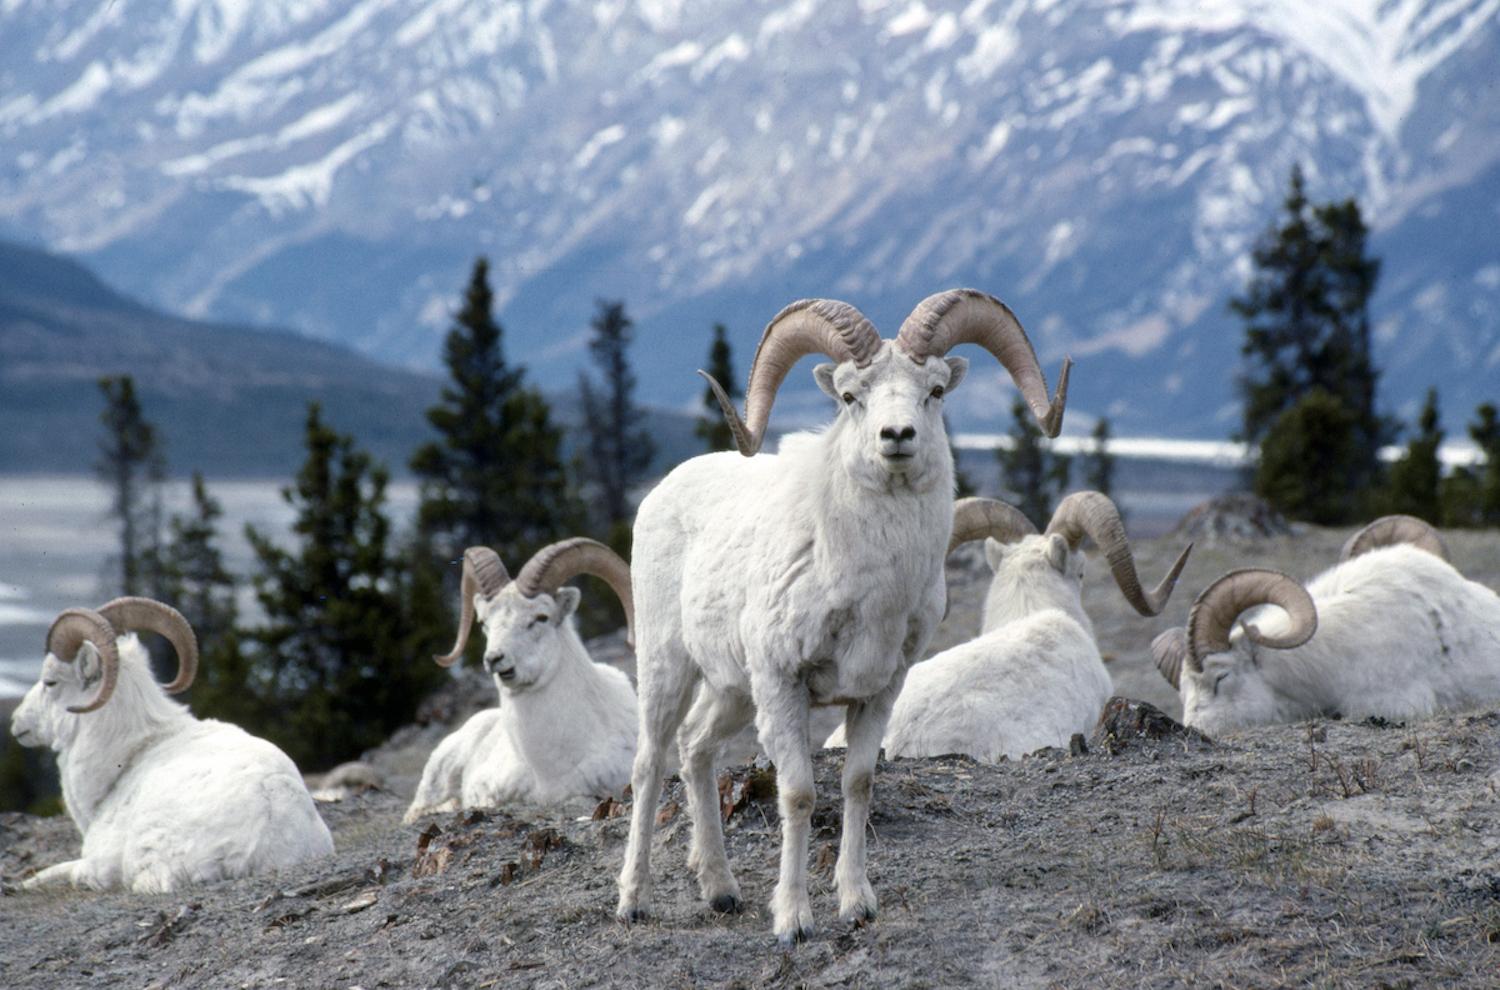 Dall's sheep, with their curled horns, are an iconic mammal in Kluane.